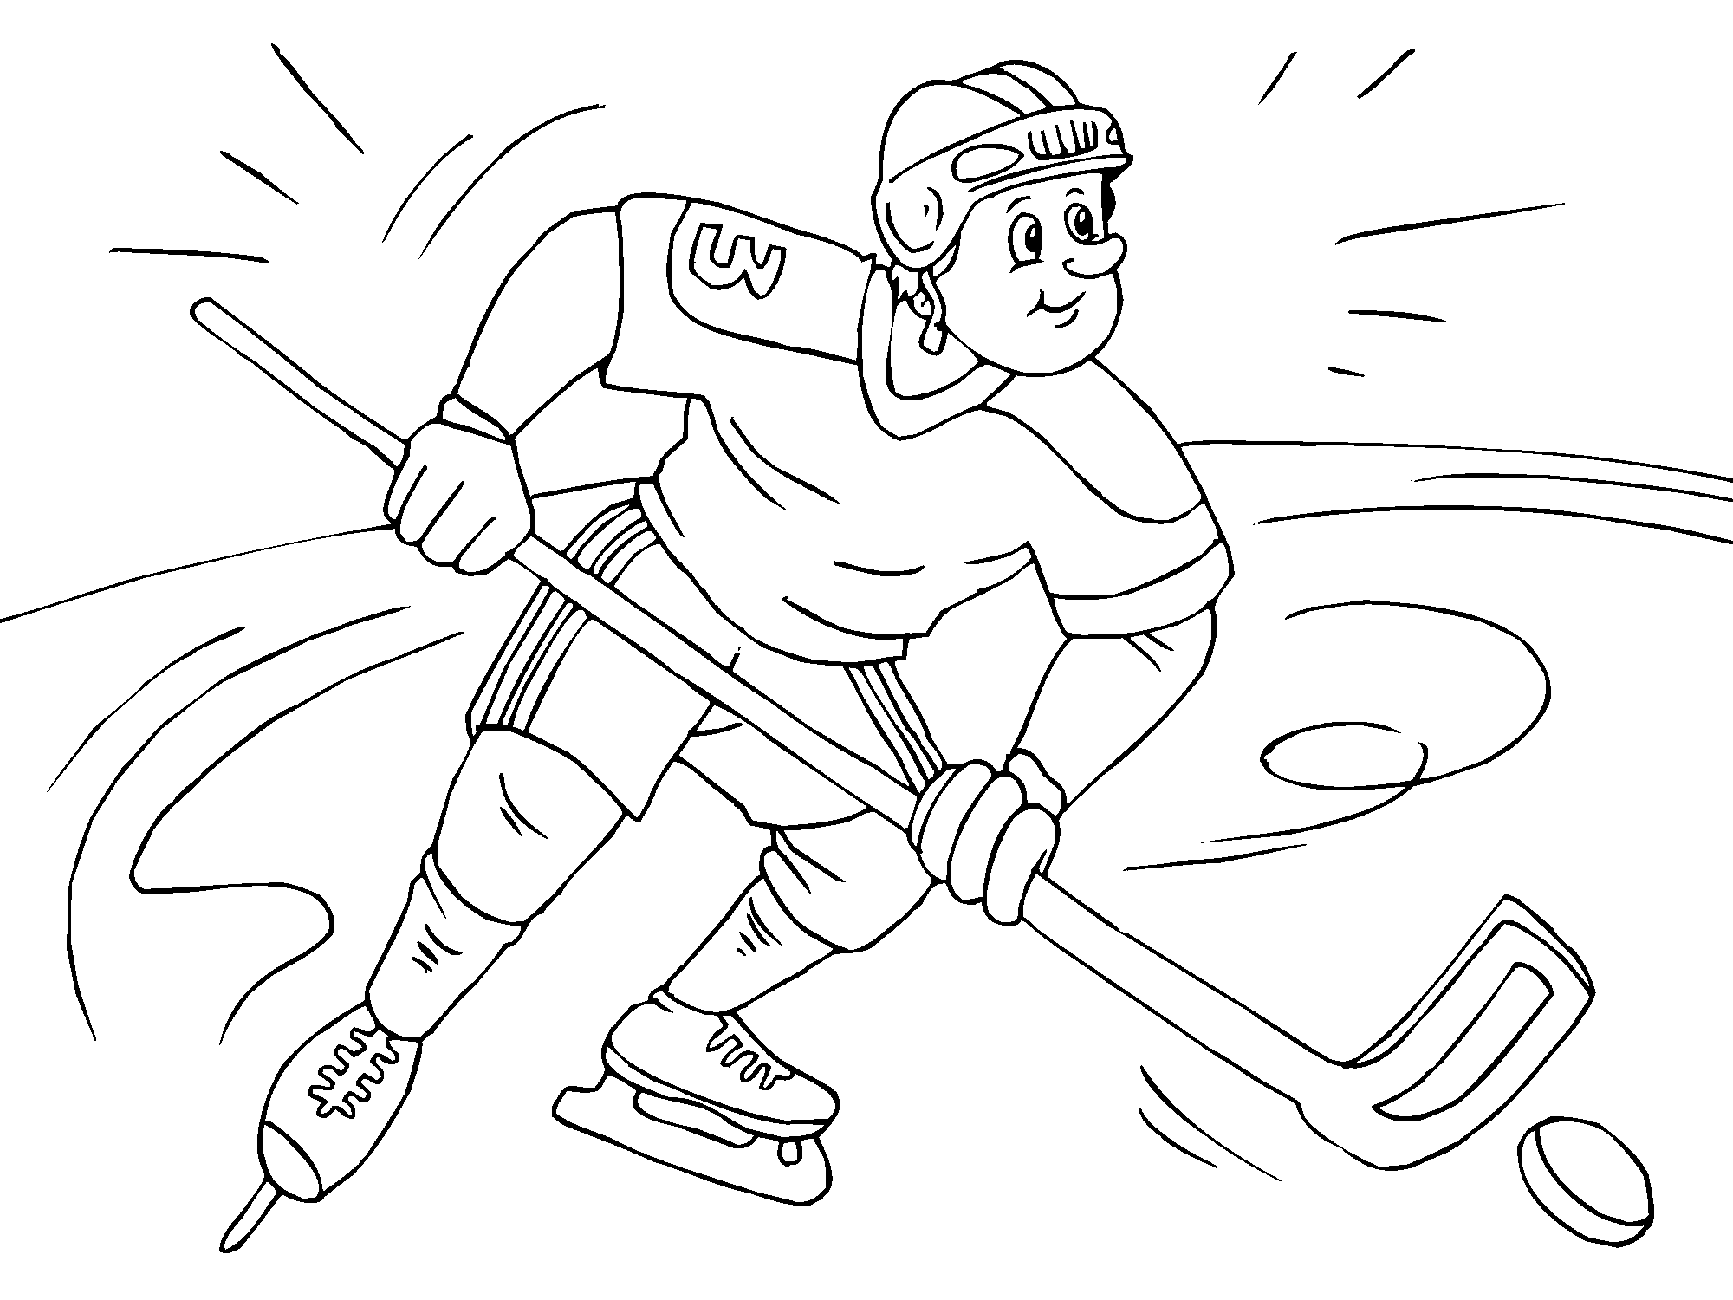 hockey-player-coloring-pages-to-download-and-print-for-free